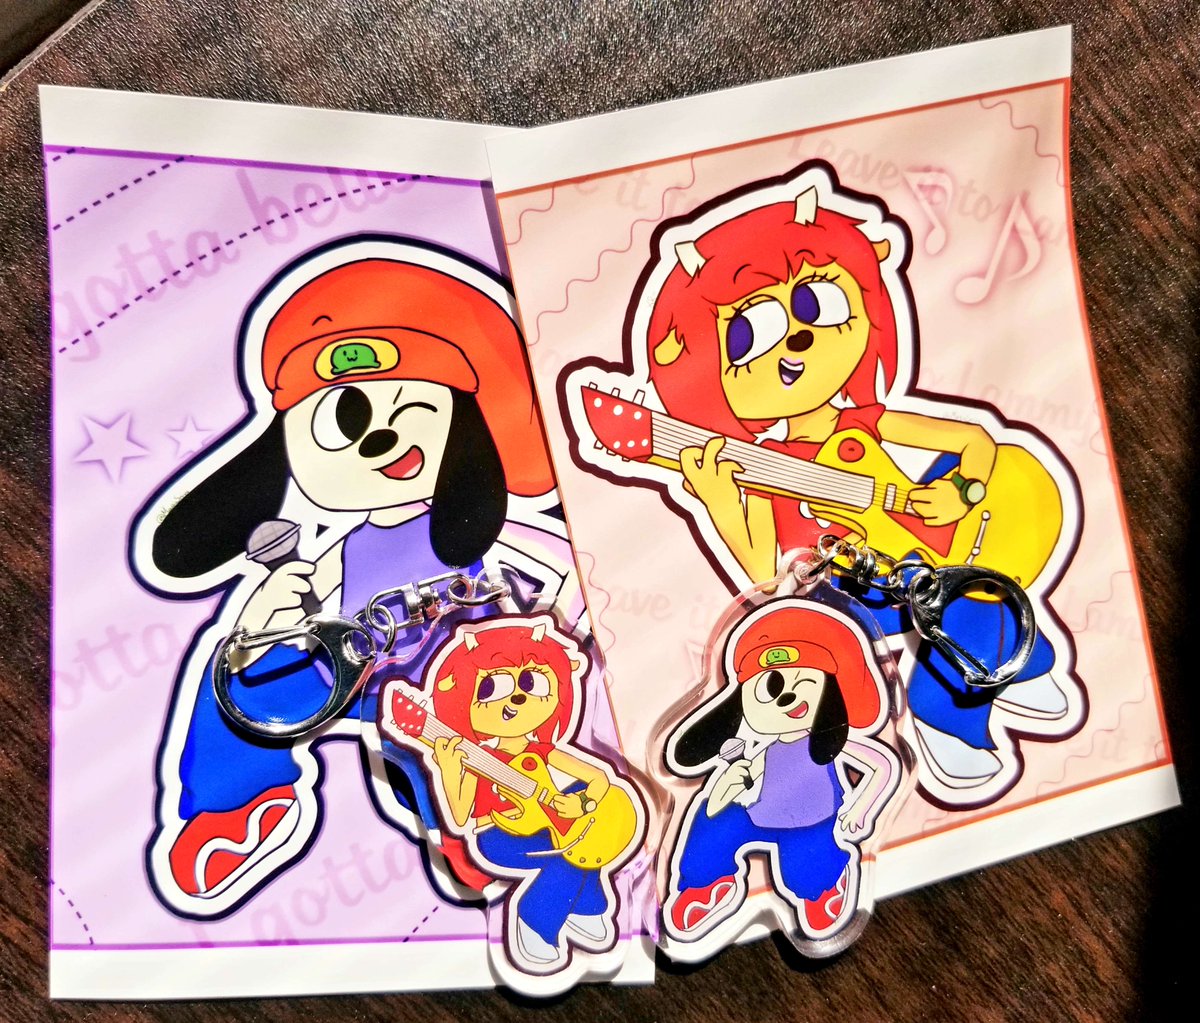 Rappin' and jammin'! 🎤🎶🎸 #parappatherapper #umjammerlammy